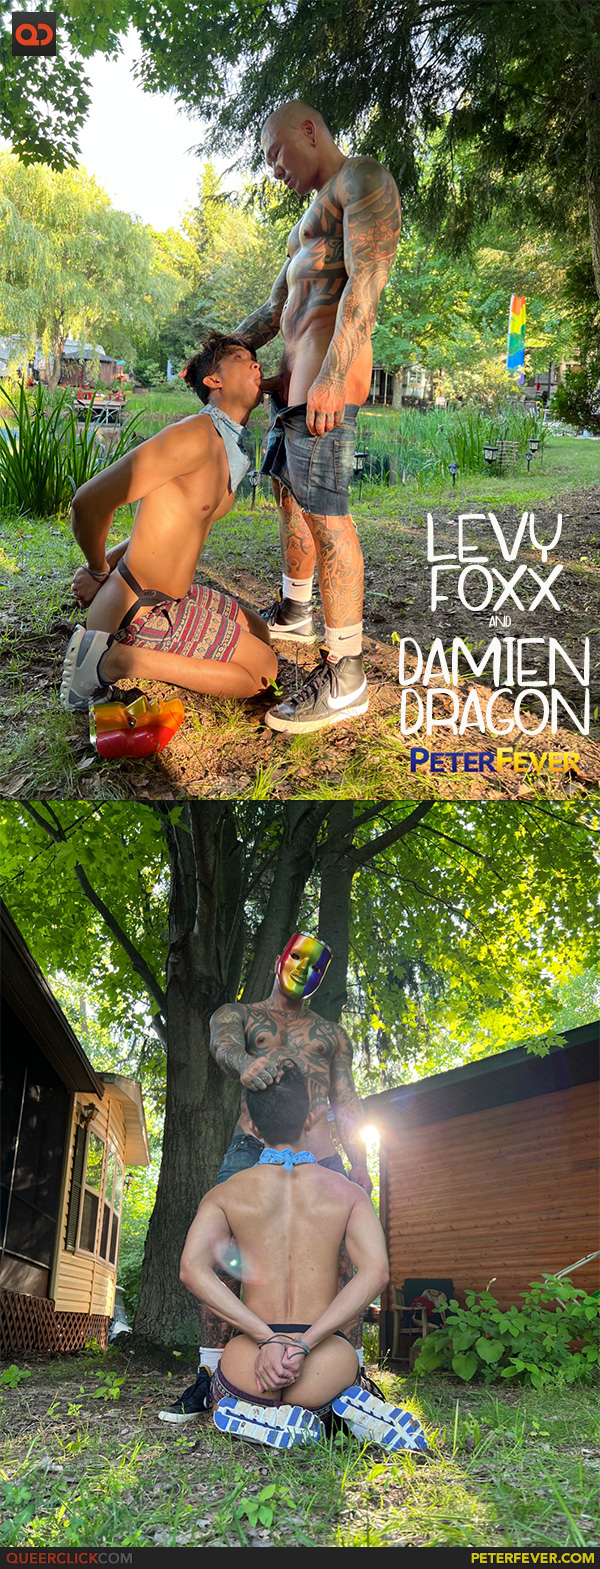 Peter Fever: Levy Foxx and Damien Dragon